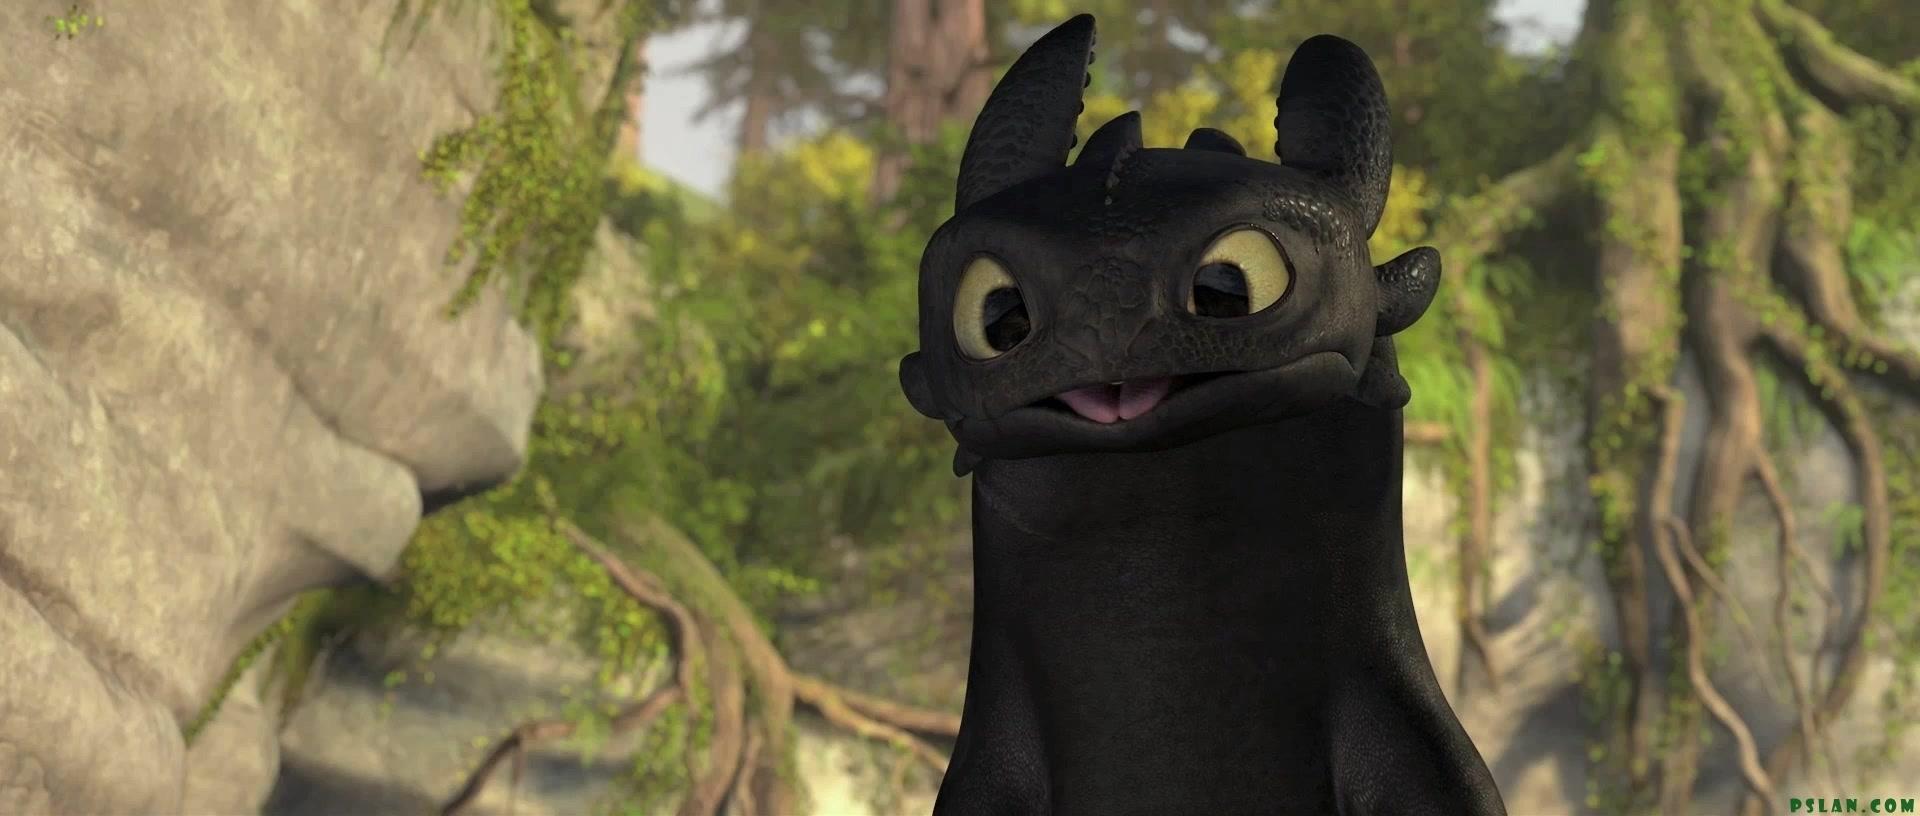 how to train your dragon, toothless (how to train your dragon), movie